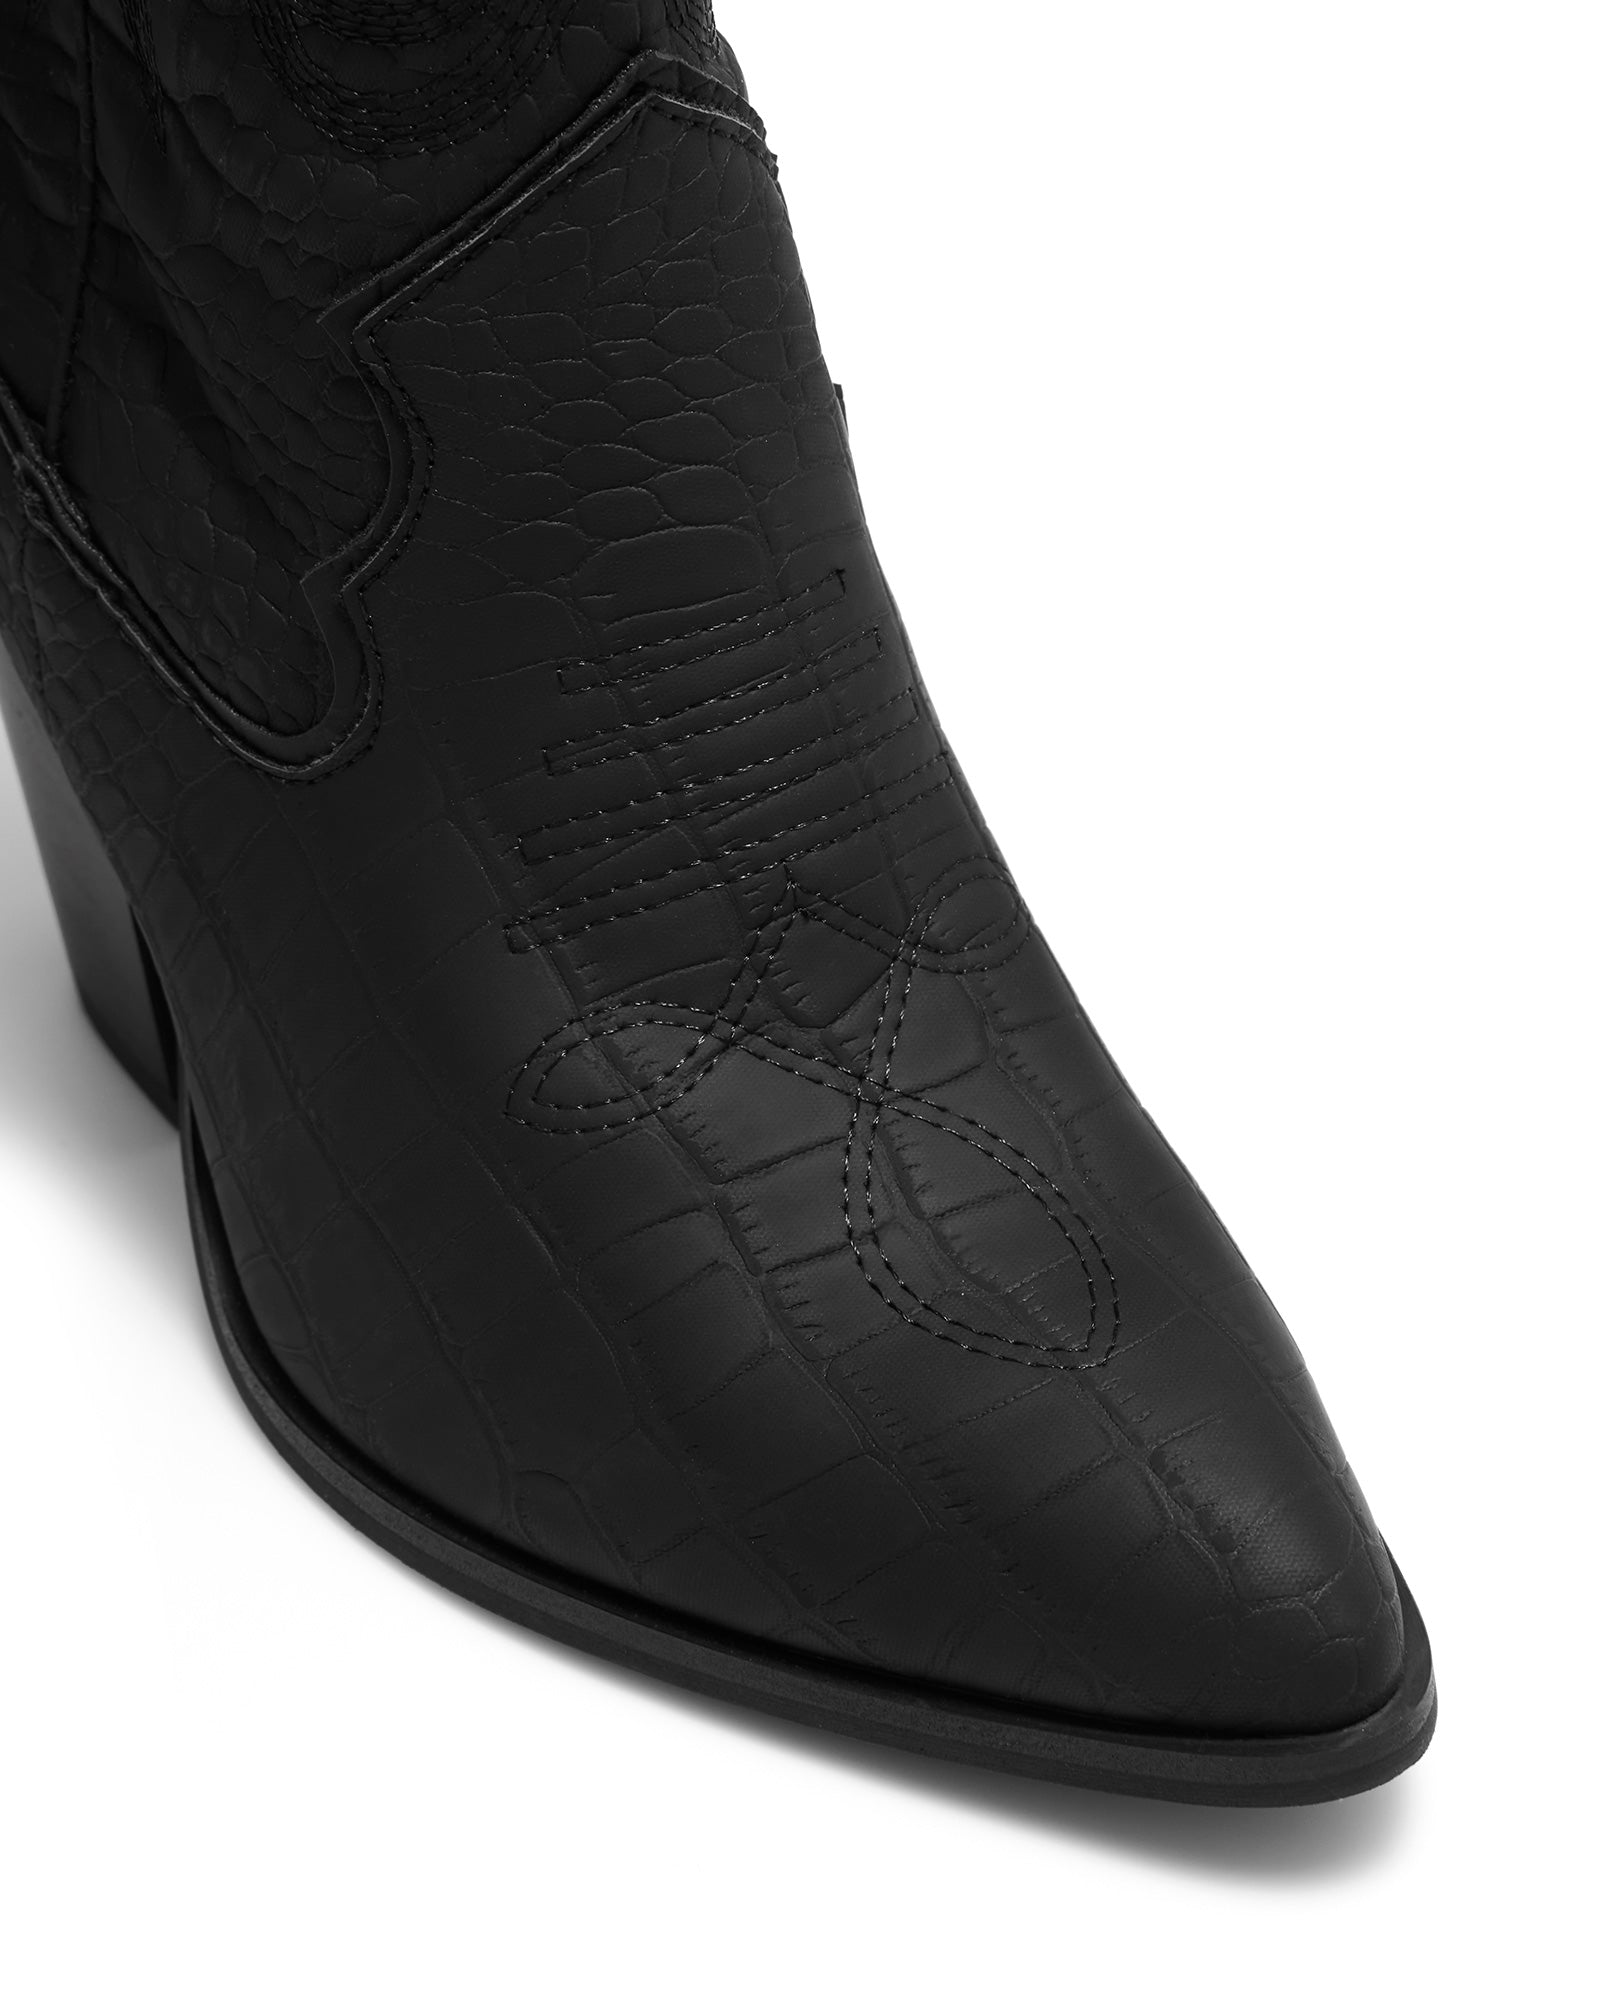 Therapy Shoes Dutchess Black Croc | Women's Boots | Western | Knee High | Tall